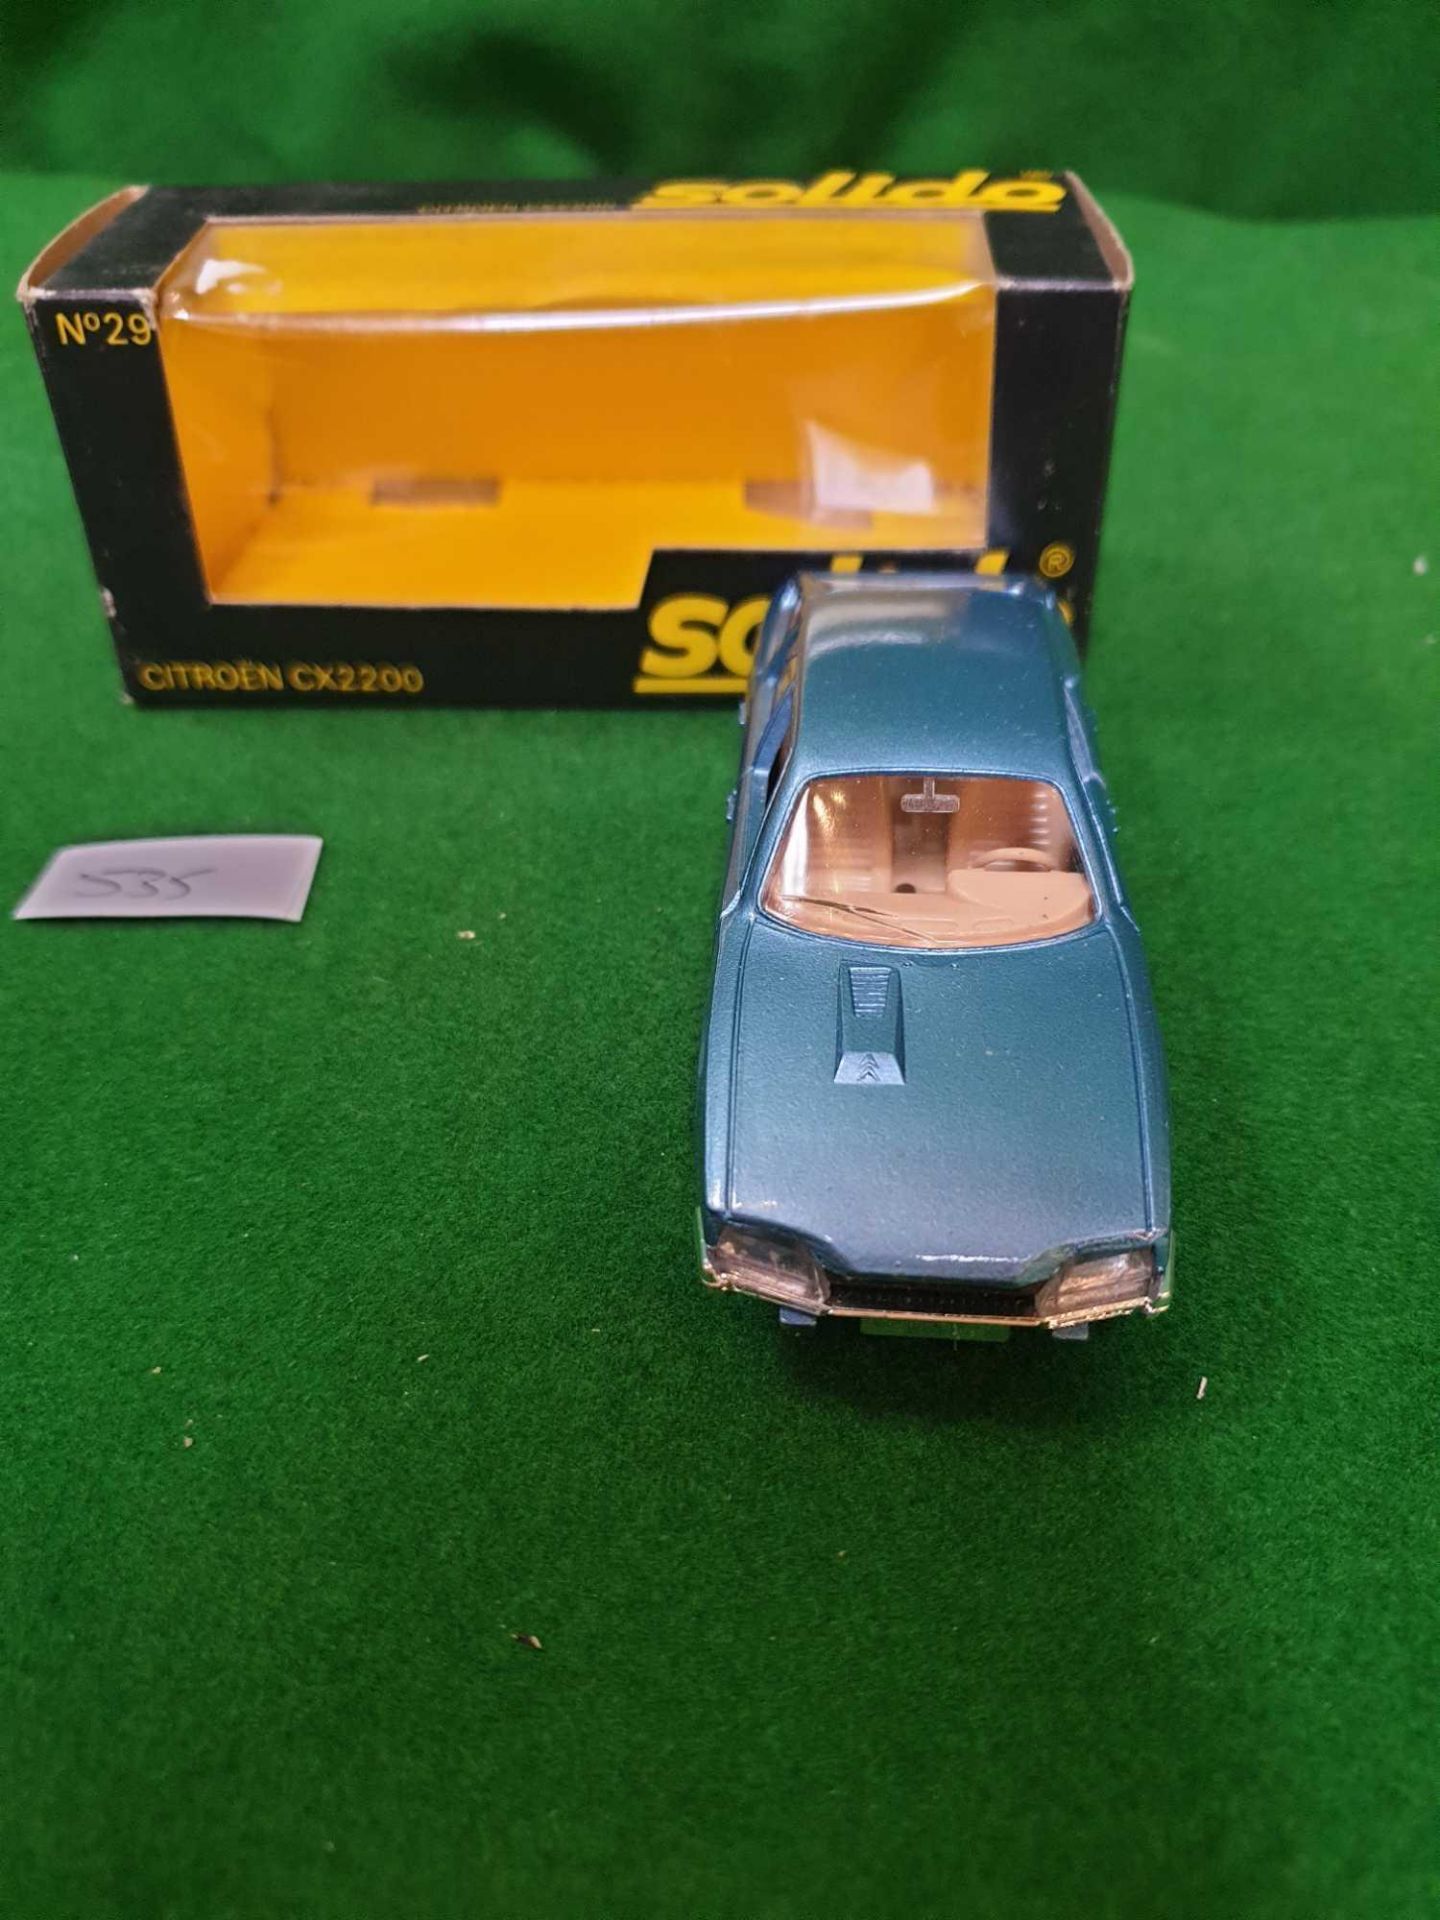 Solido #29 Citroen CX2200 Metallic Blue Virtually Mint To Mint Model In A Good Box - Image 4 of 4